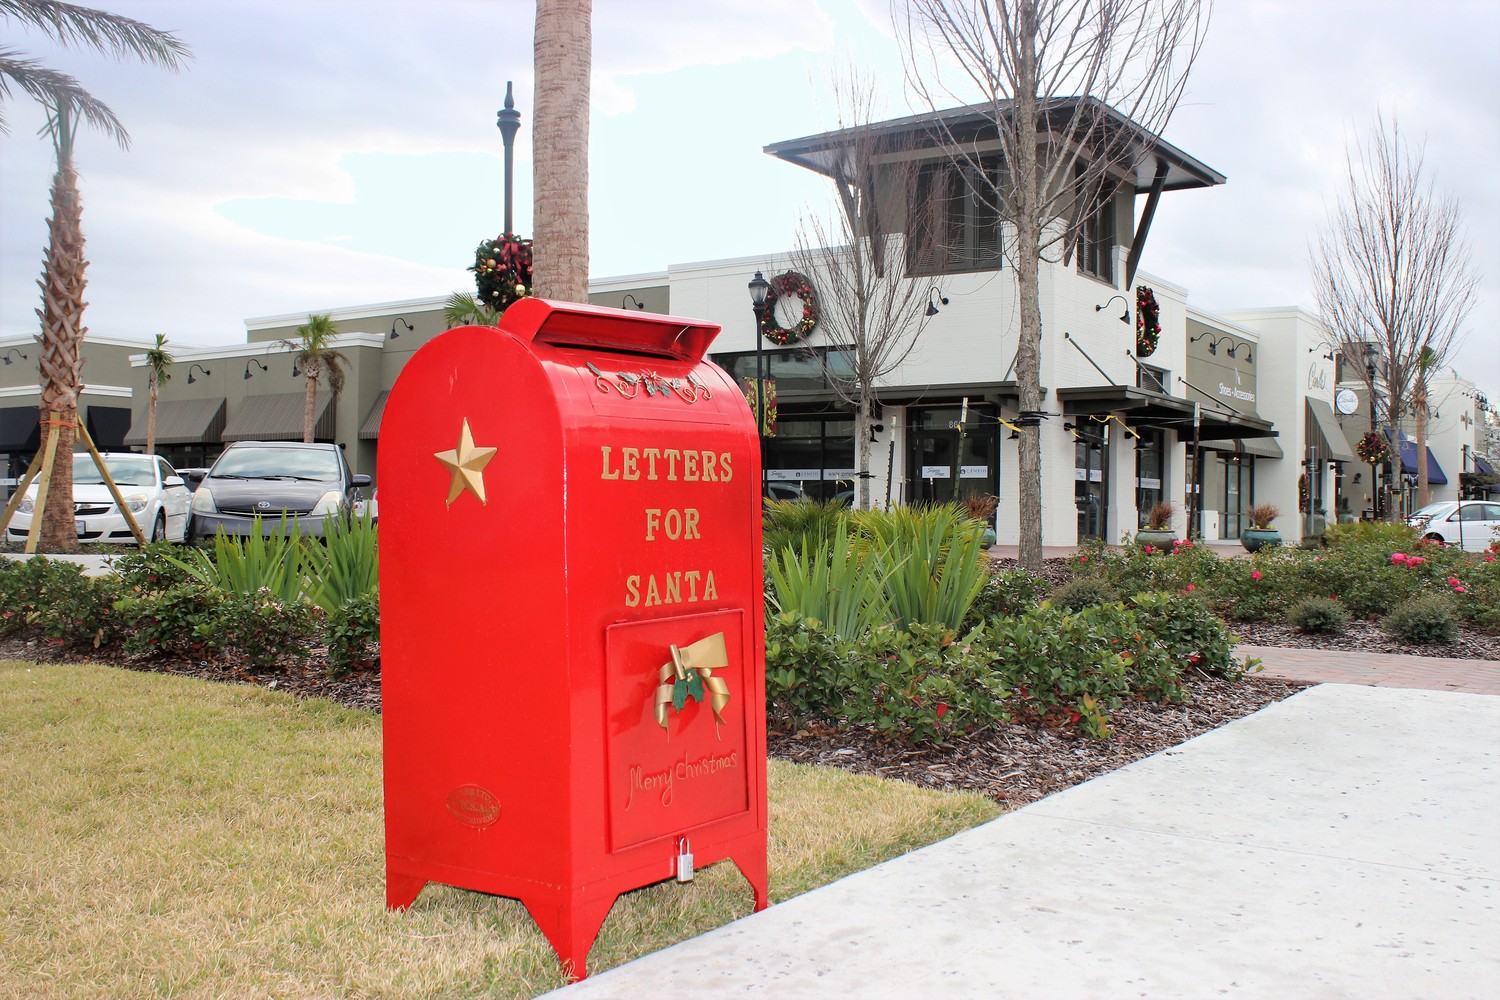 A mailbox for letters to Santa will be located near Nona Blue in Sawgrass Village. Letters mailed by Dec. 15 will receive a response from Saint Nick.